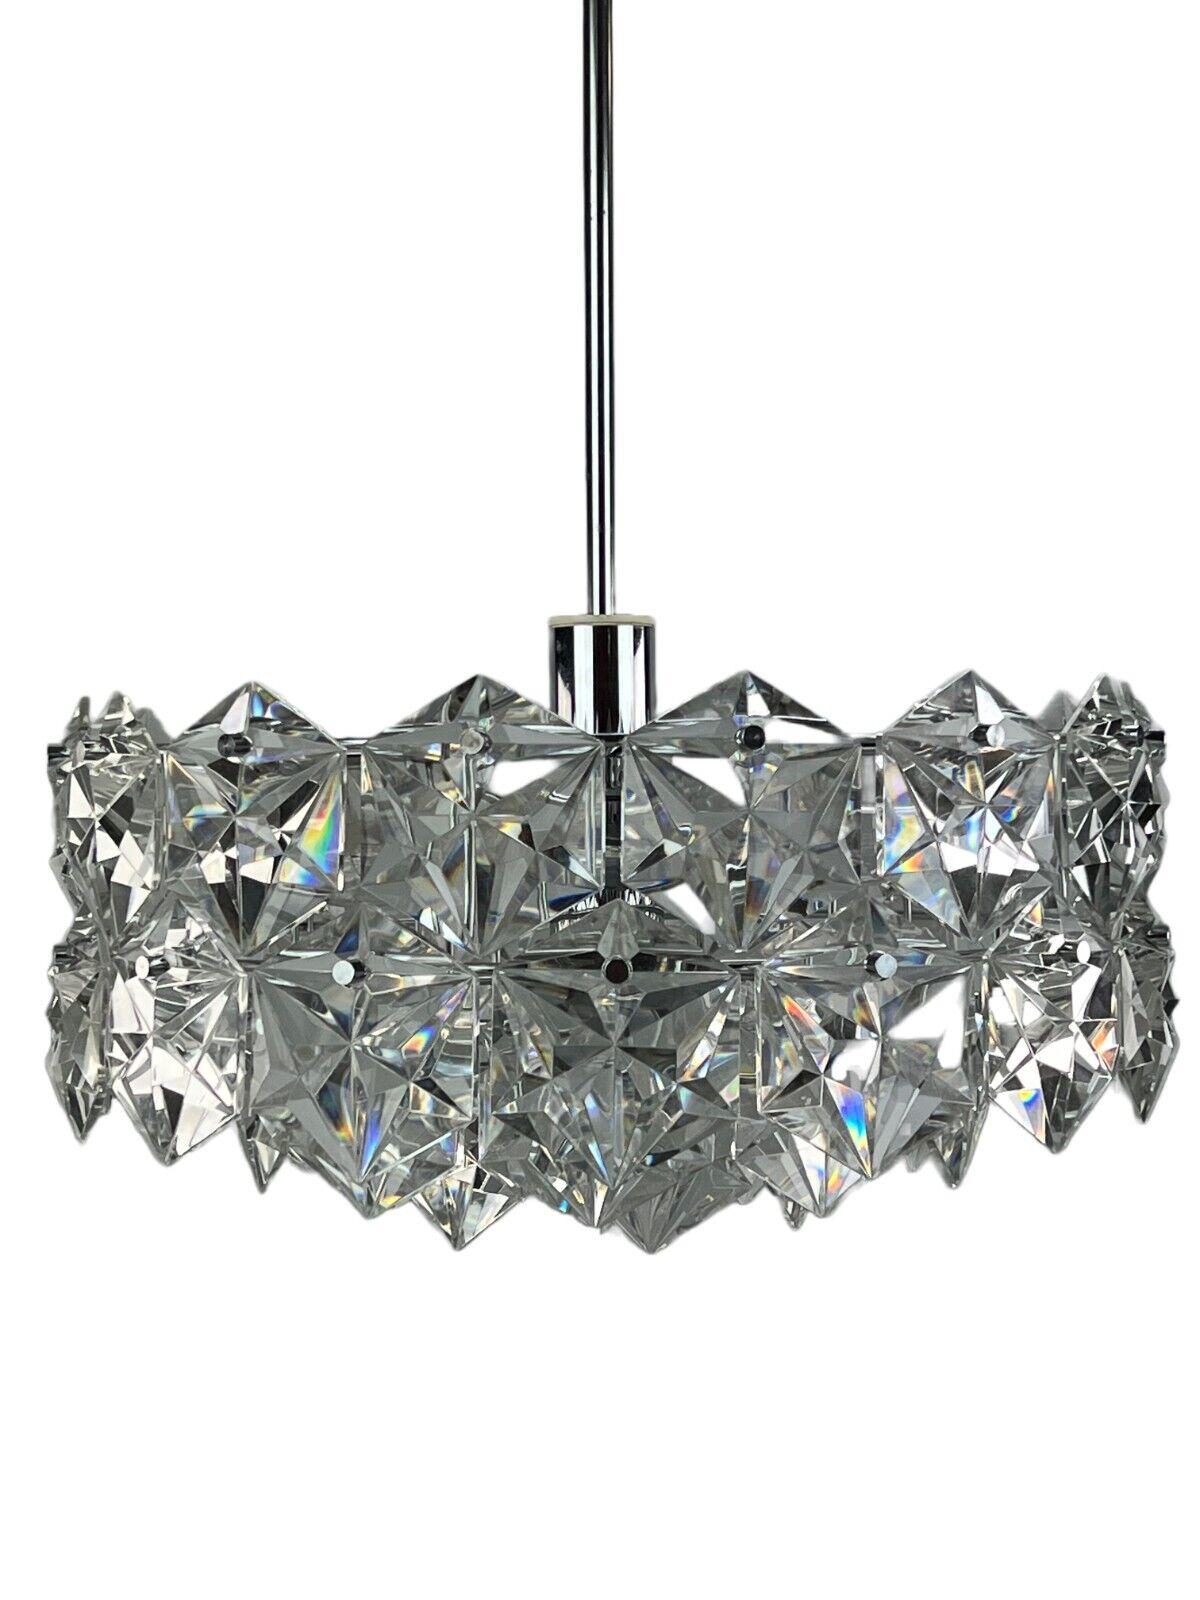 60s 70s Ceiling lamp Chandelier Kinkeldey Space Age 60s 70s.

Object: chandelier

Manufacturer: Kinkeldey

Condition: good

Age: around 1960-1970

Dimensions:

Diameter = 43cm
Height = 60cm

Other notes:

6x E14 socket
1x E27